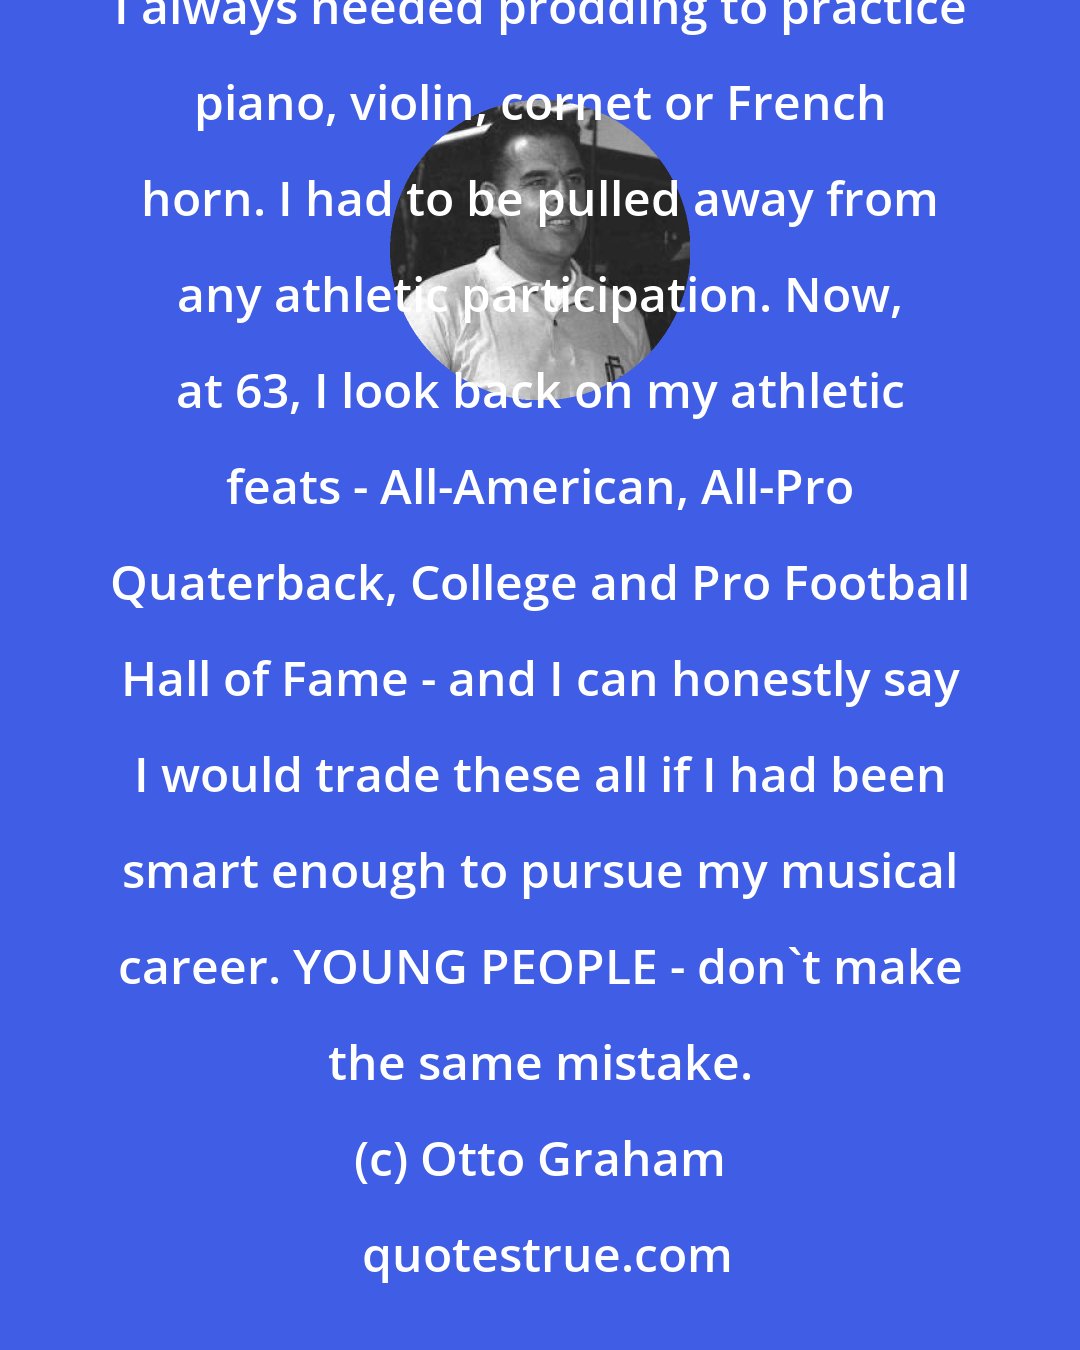 Otto Graham: I was born with God-given gifts of very talented musical ability and exceptoinal physical coordination. I always needed prodding to practice piano, violin, cornet or French horn. I had to be pulled away from any athletic participation. Now, at 63, I look back on my athletic feats - All-American, All-Pro Quaterback, College and Pro Football Hall of Fame - and I can honestly say I would trade these all if I had been smart enough to pursue my musical career. YOUNG PEOPLE - don't make the same mistake.